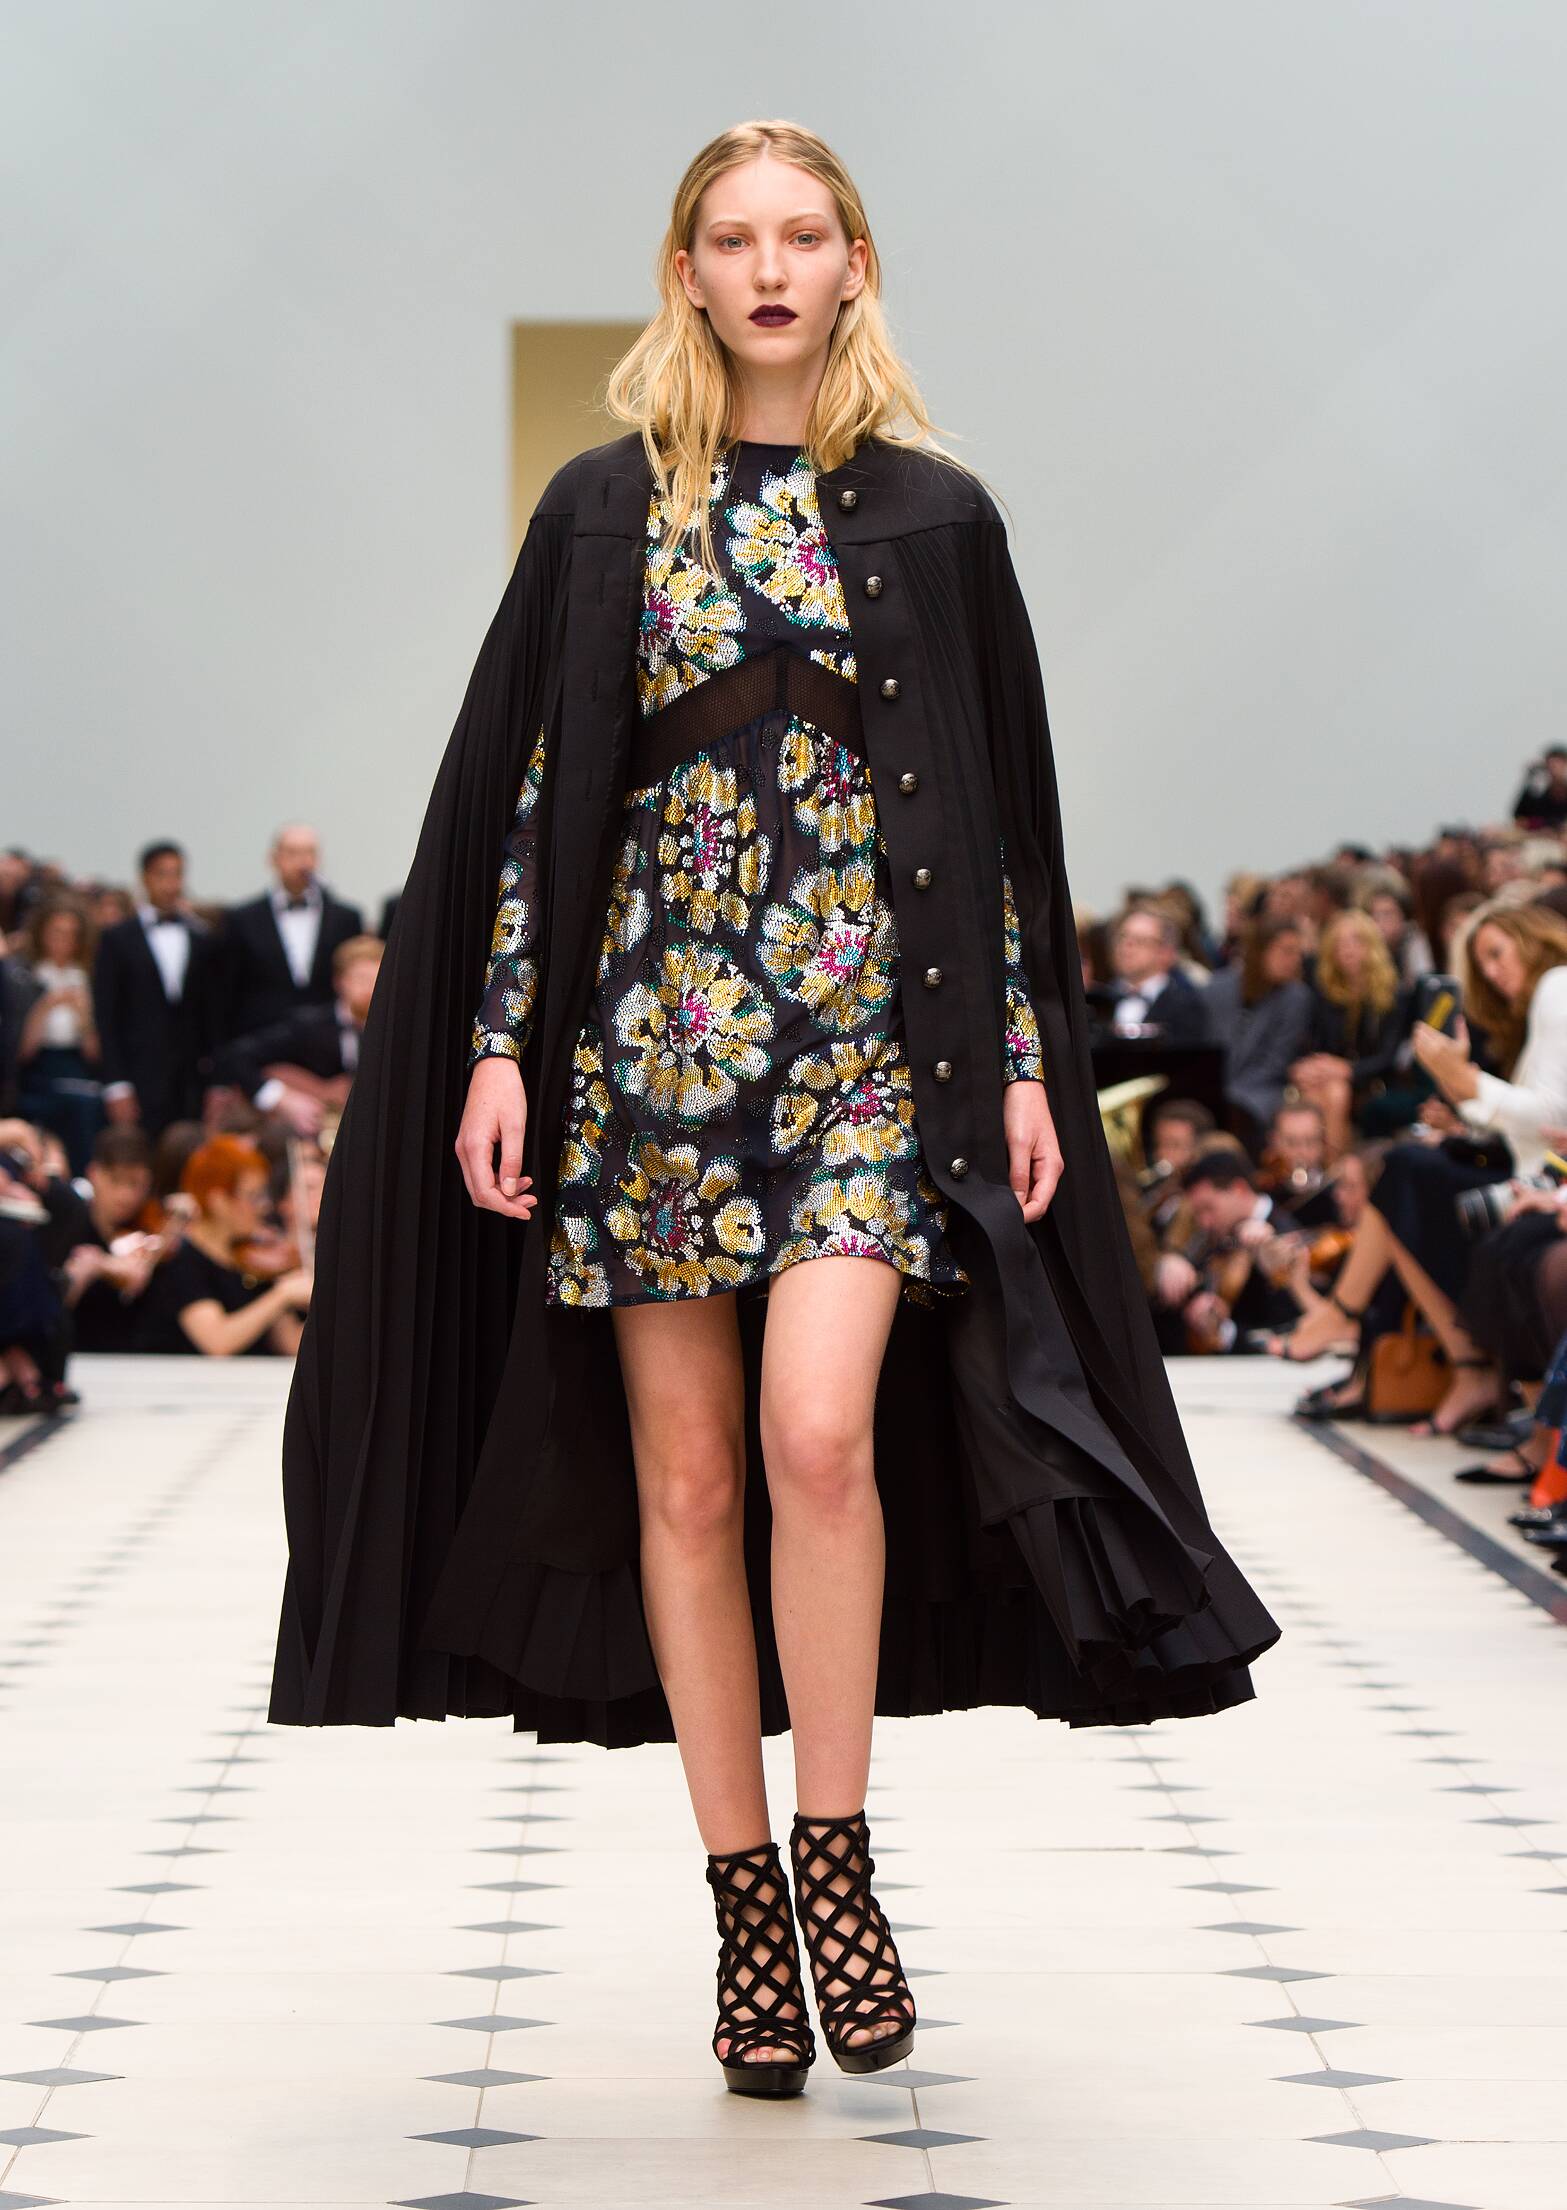 BURBERRY PRORSUM SPRING SUMMER 2016 WOMEN’S COLLECTION | The Skinny Beep